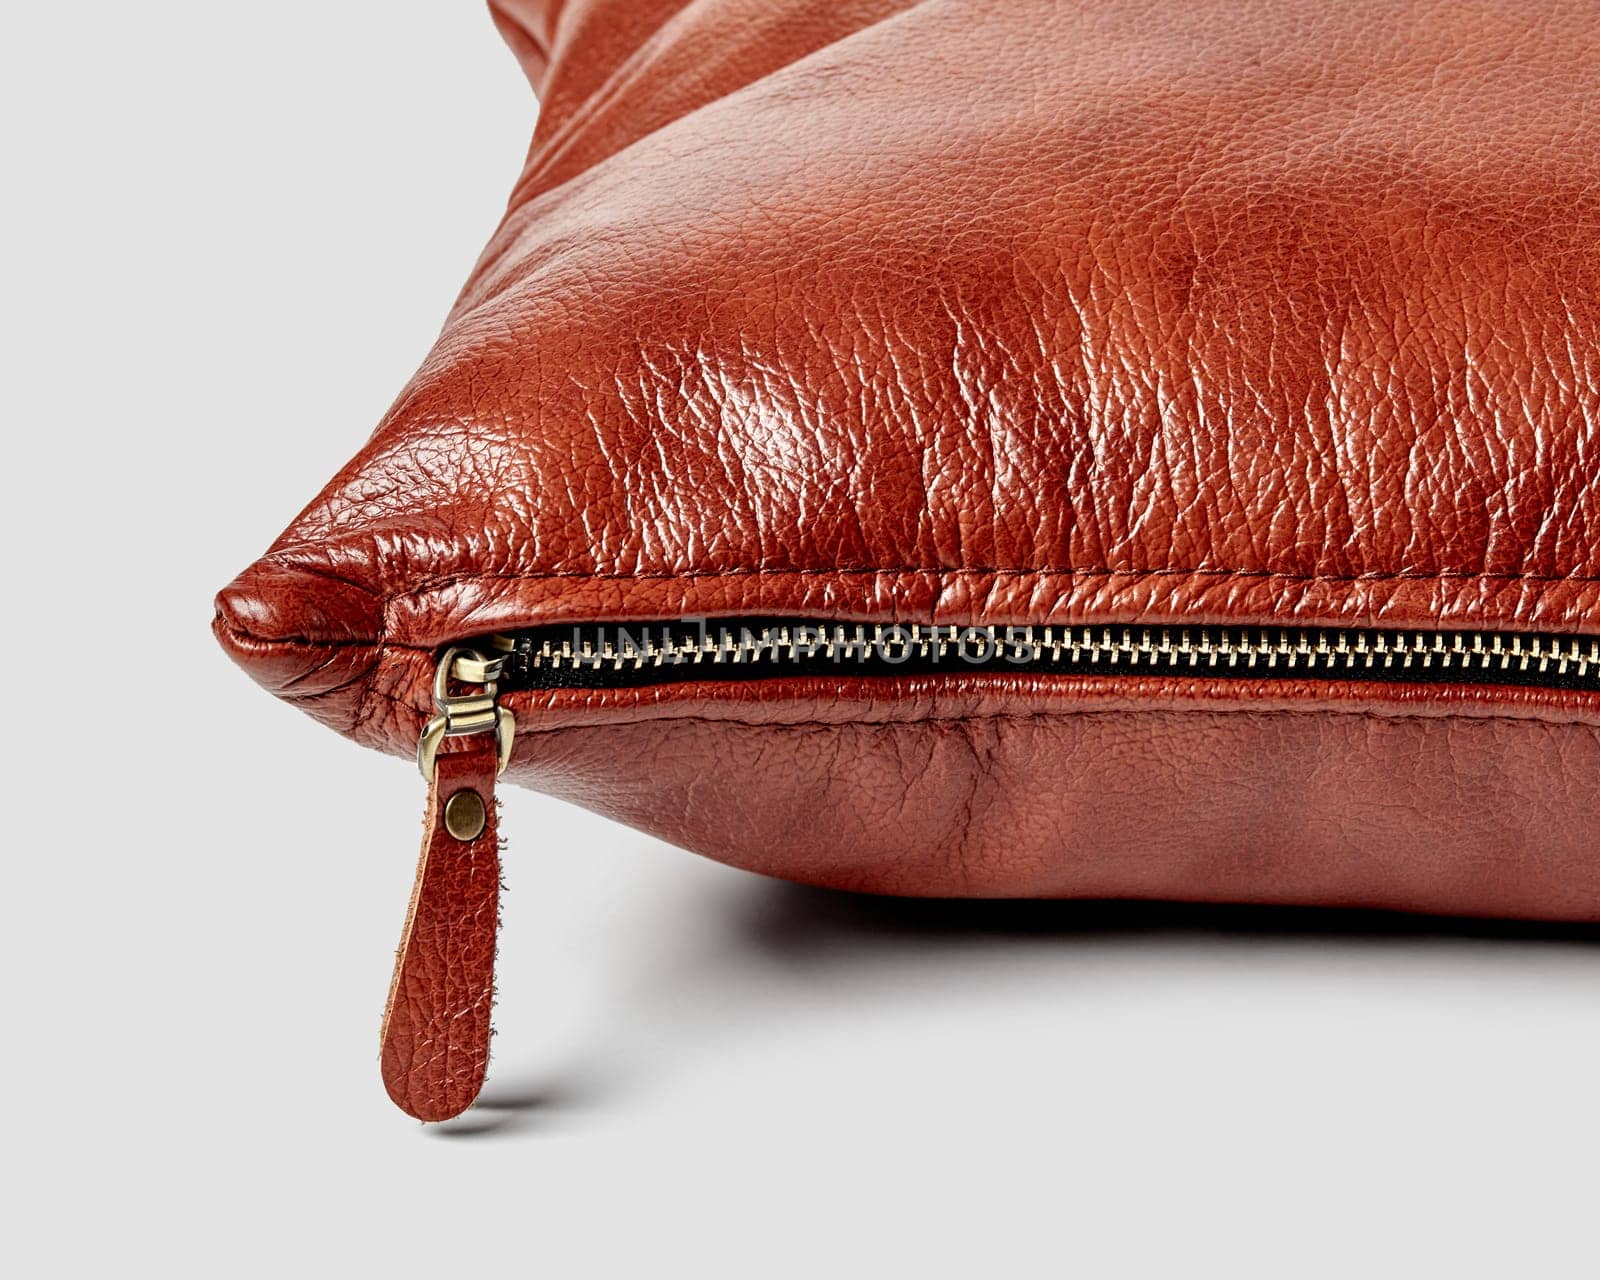 Closeup detailed view of brown leather couch cushion with side zipper by nazarovsergey